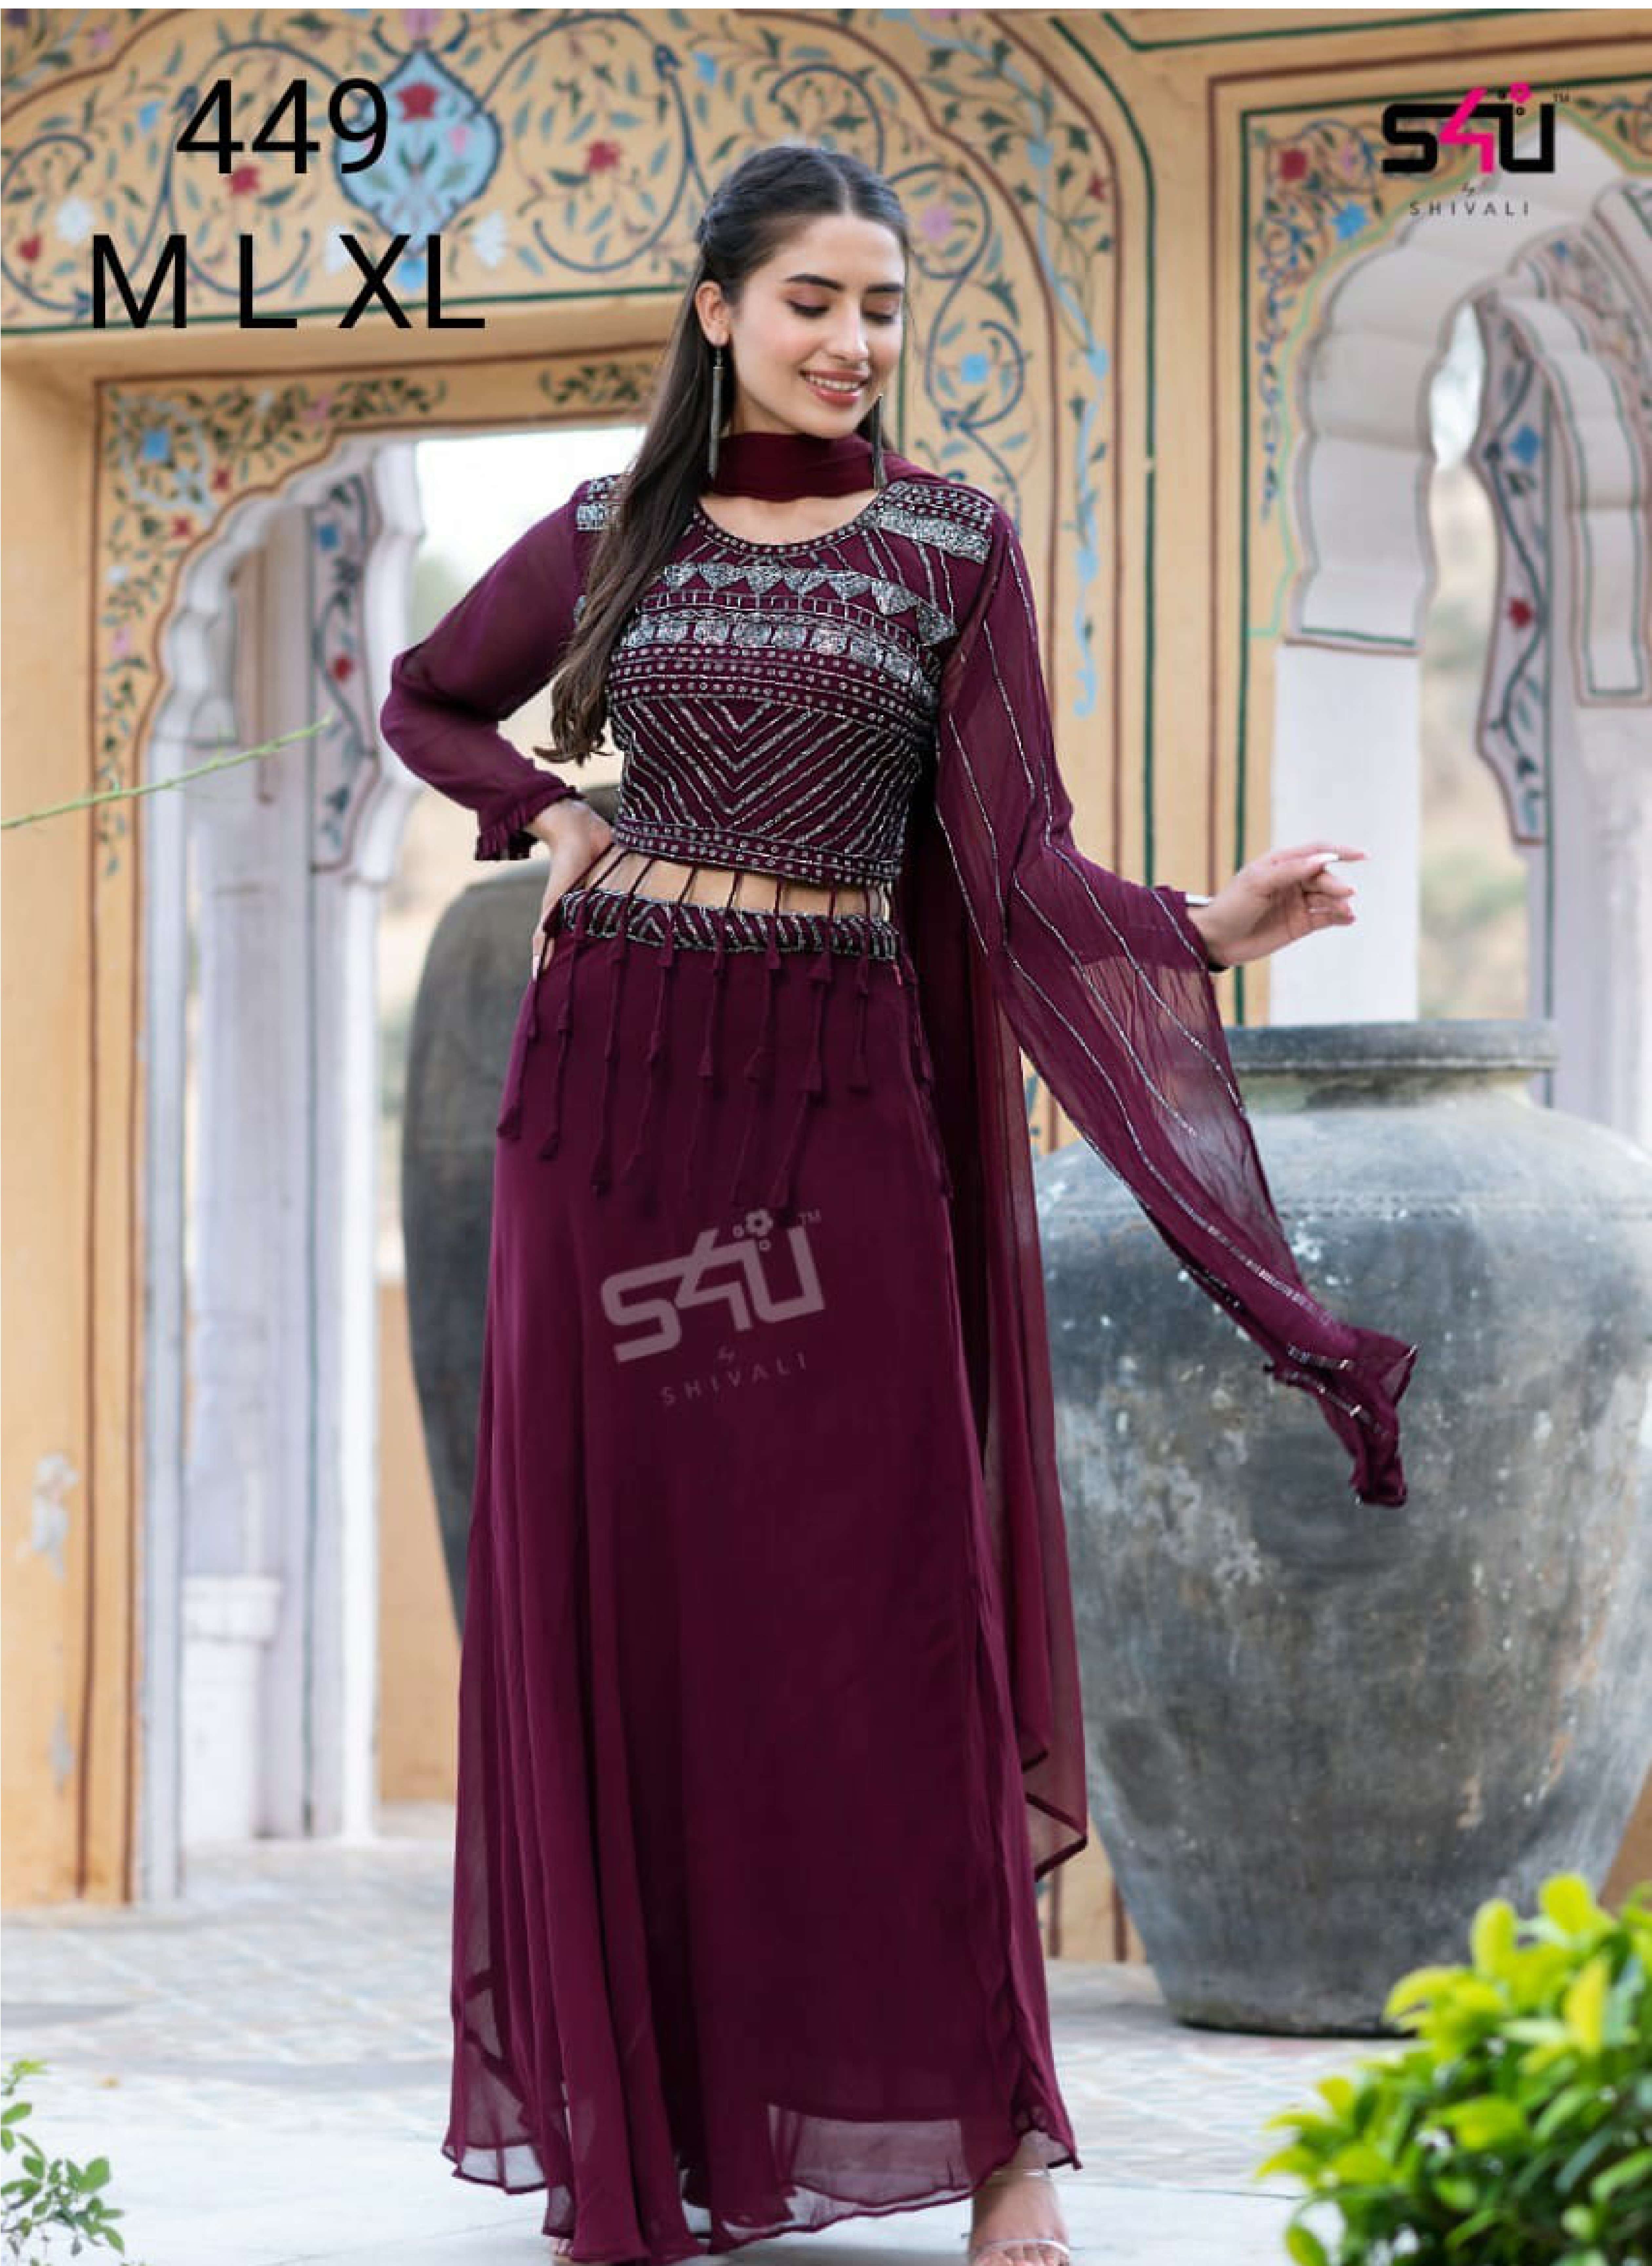 S4u Shivali Dno DH 107 Fancy With embroidery Work Stylish Designer Wed